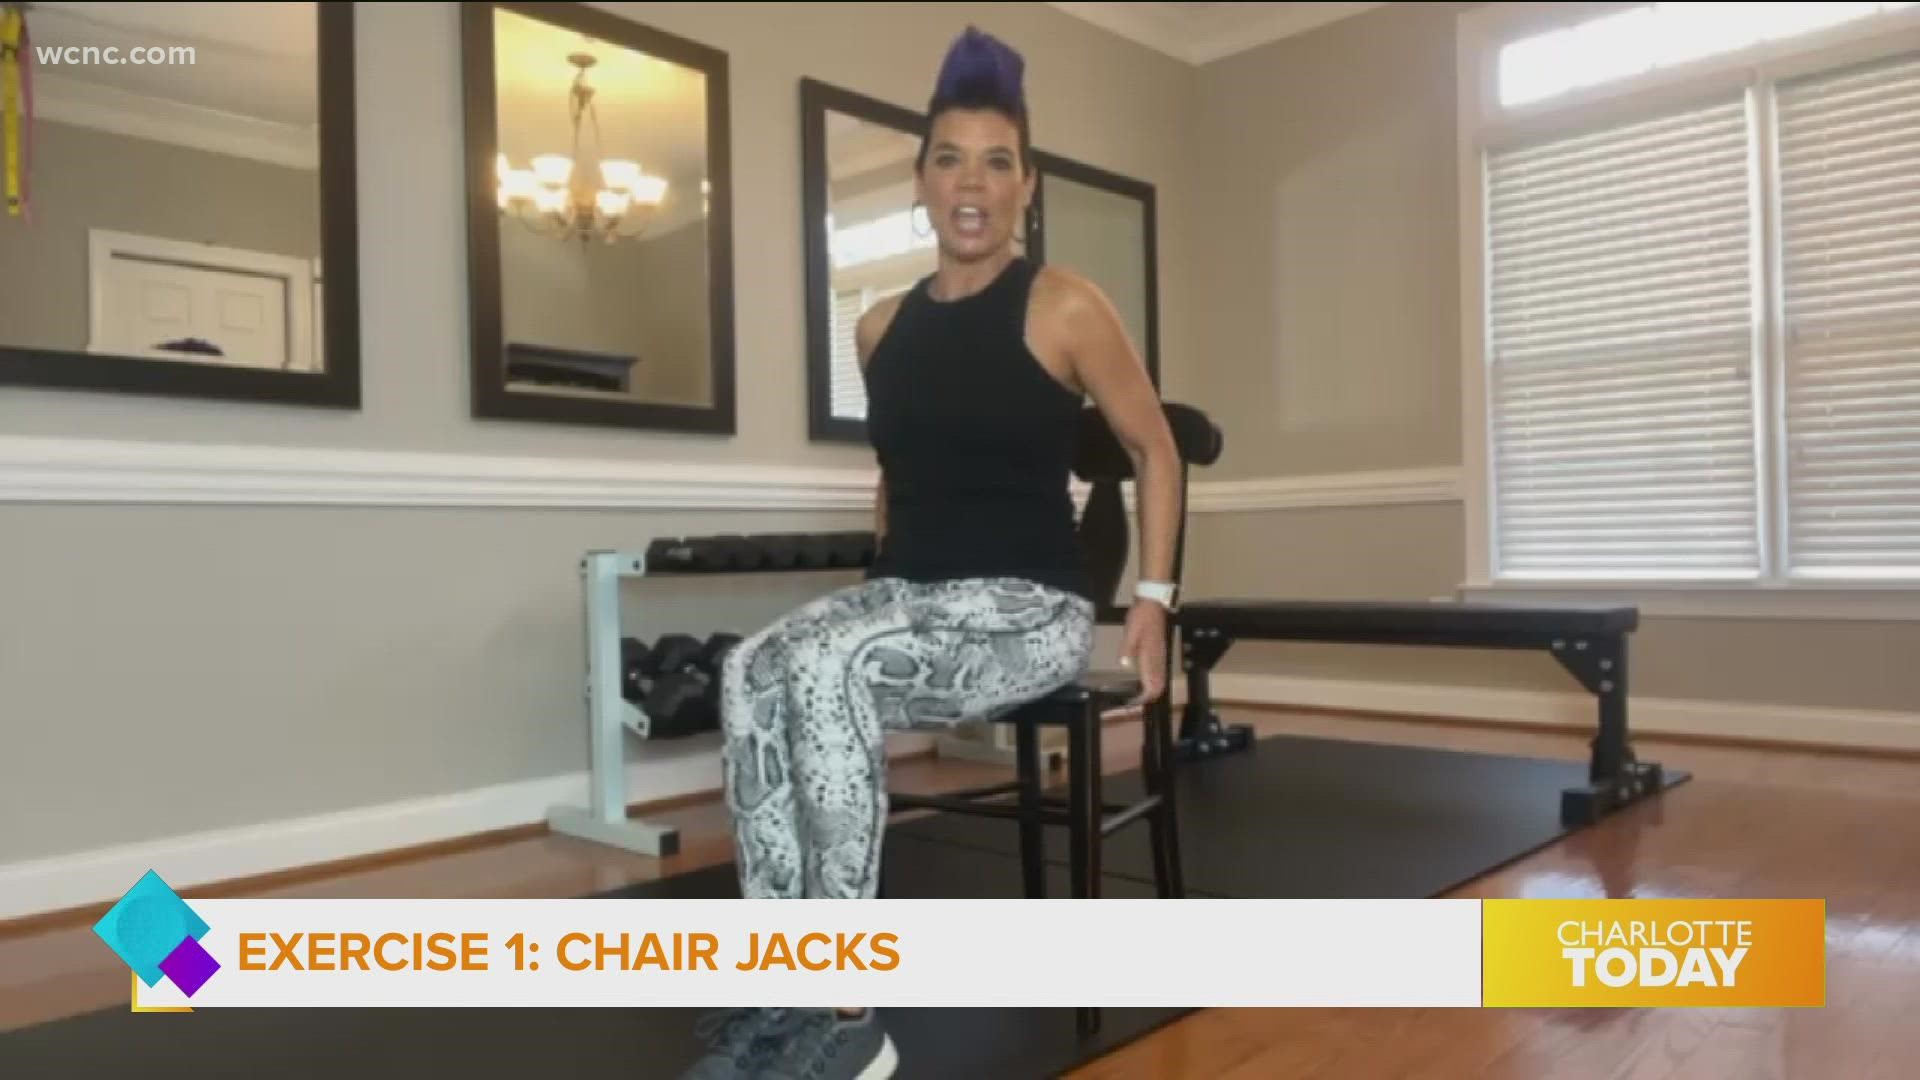 Lynn Fernandez has exercises you can do from your chair